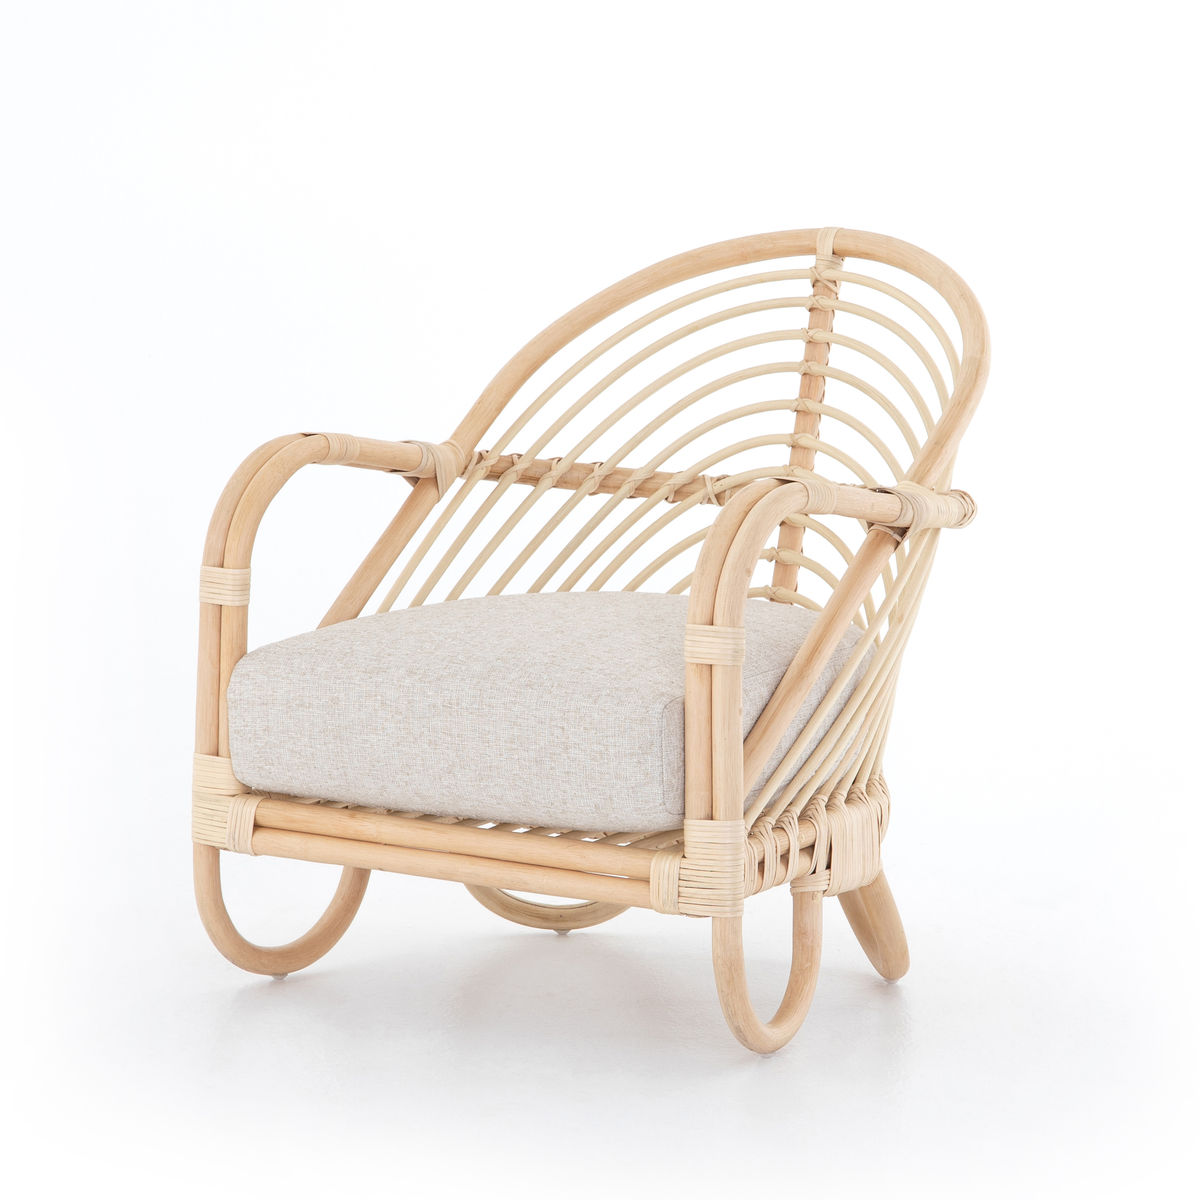 Shop Boho Chair, Natural Rattan from Peggy Haddad Interiors Home on Openhaus